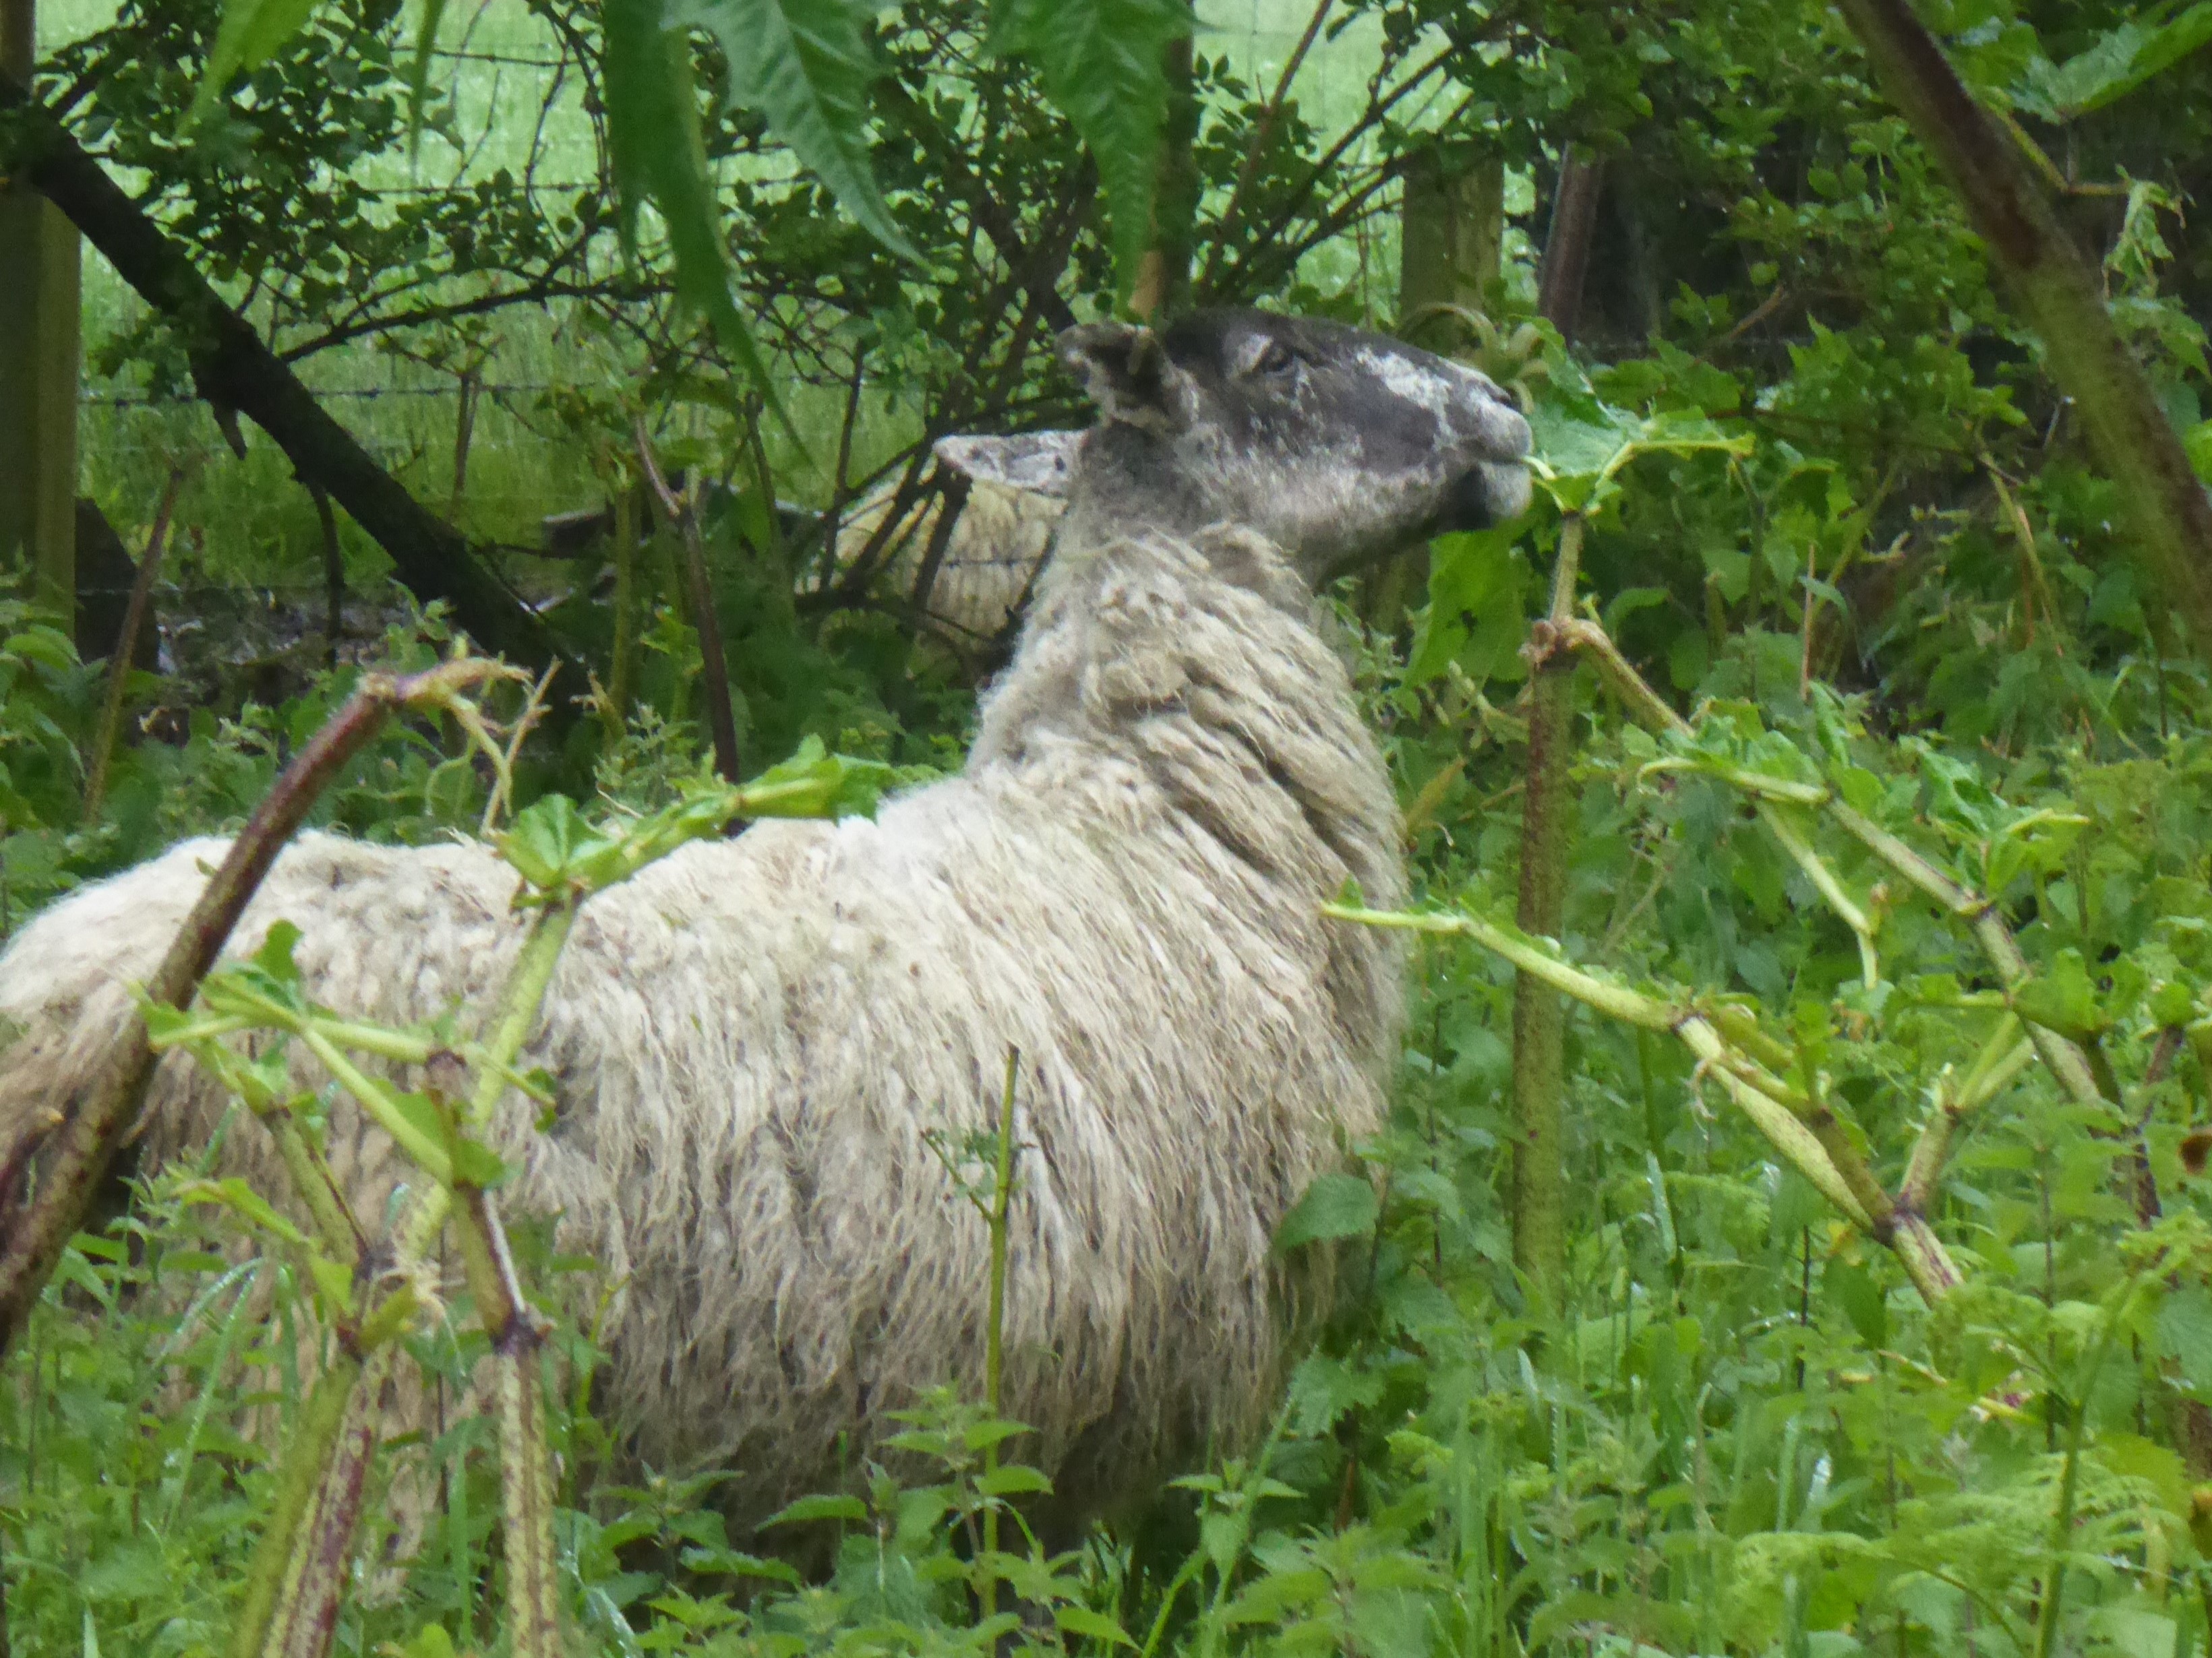 sheep grazing giant hogweed at trial site